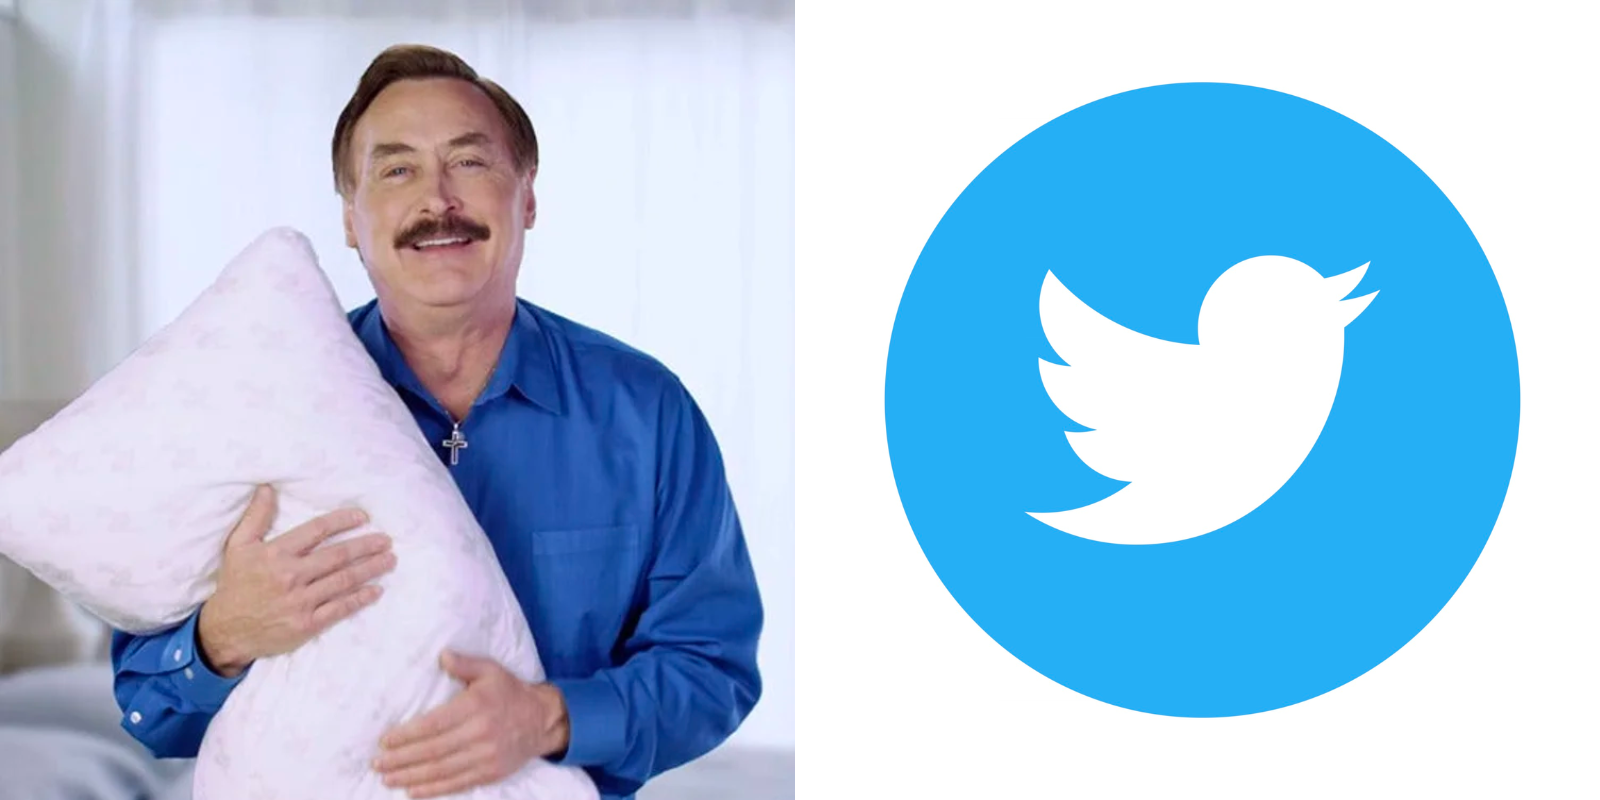 BREAKING: Twitter flagged the term ‘My Pillow’ as misinformation